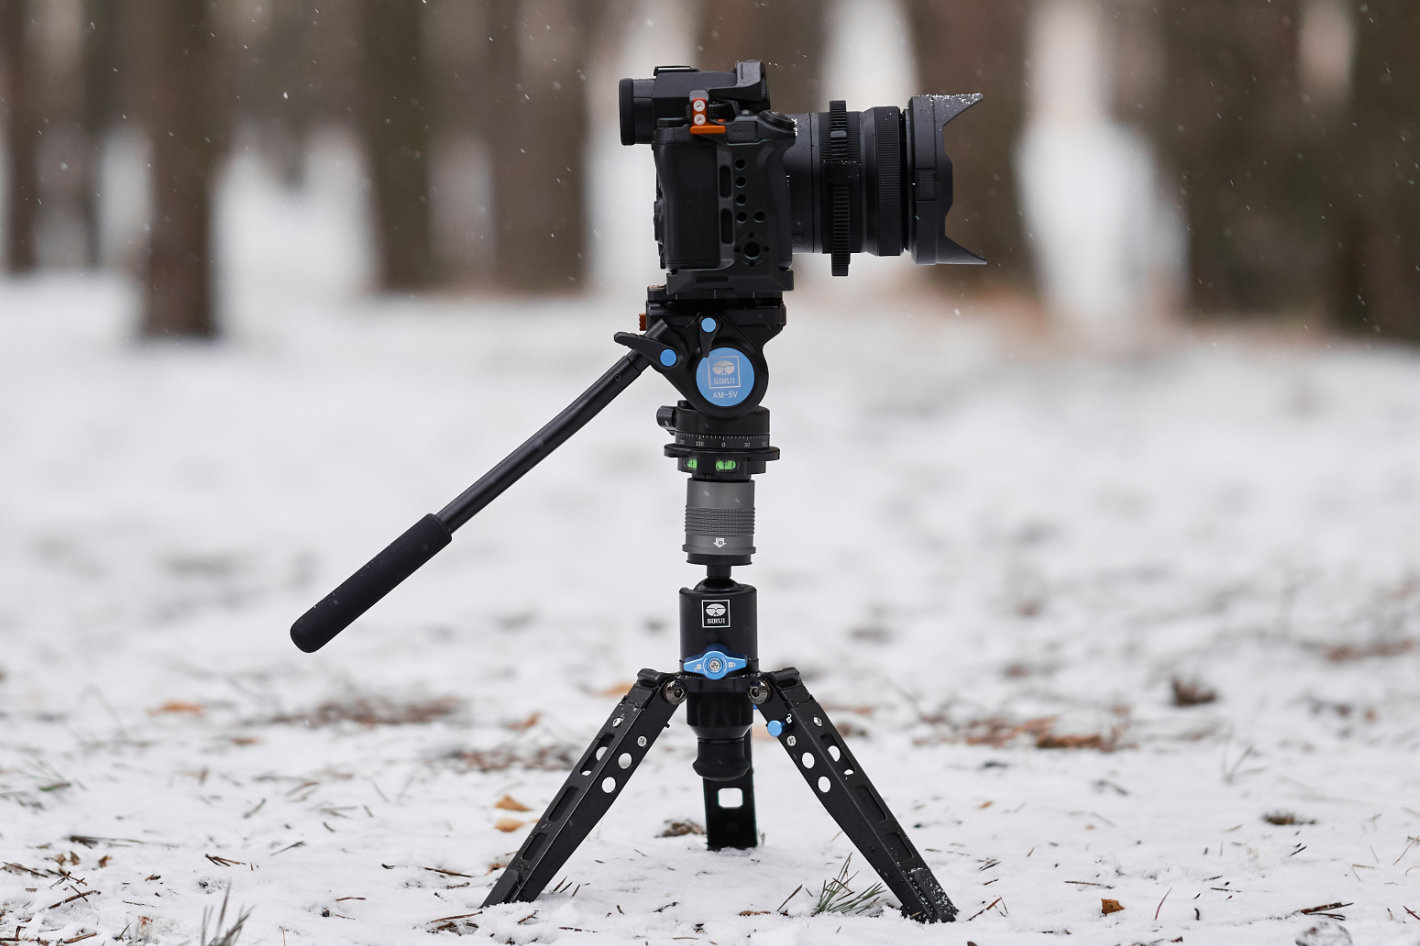 Sirui SVM: the agility of a monopod and the stability of a tripod